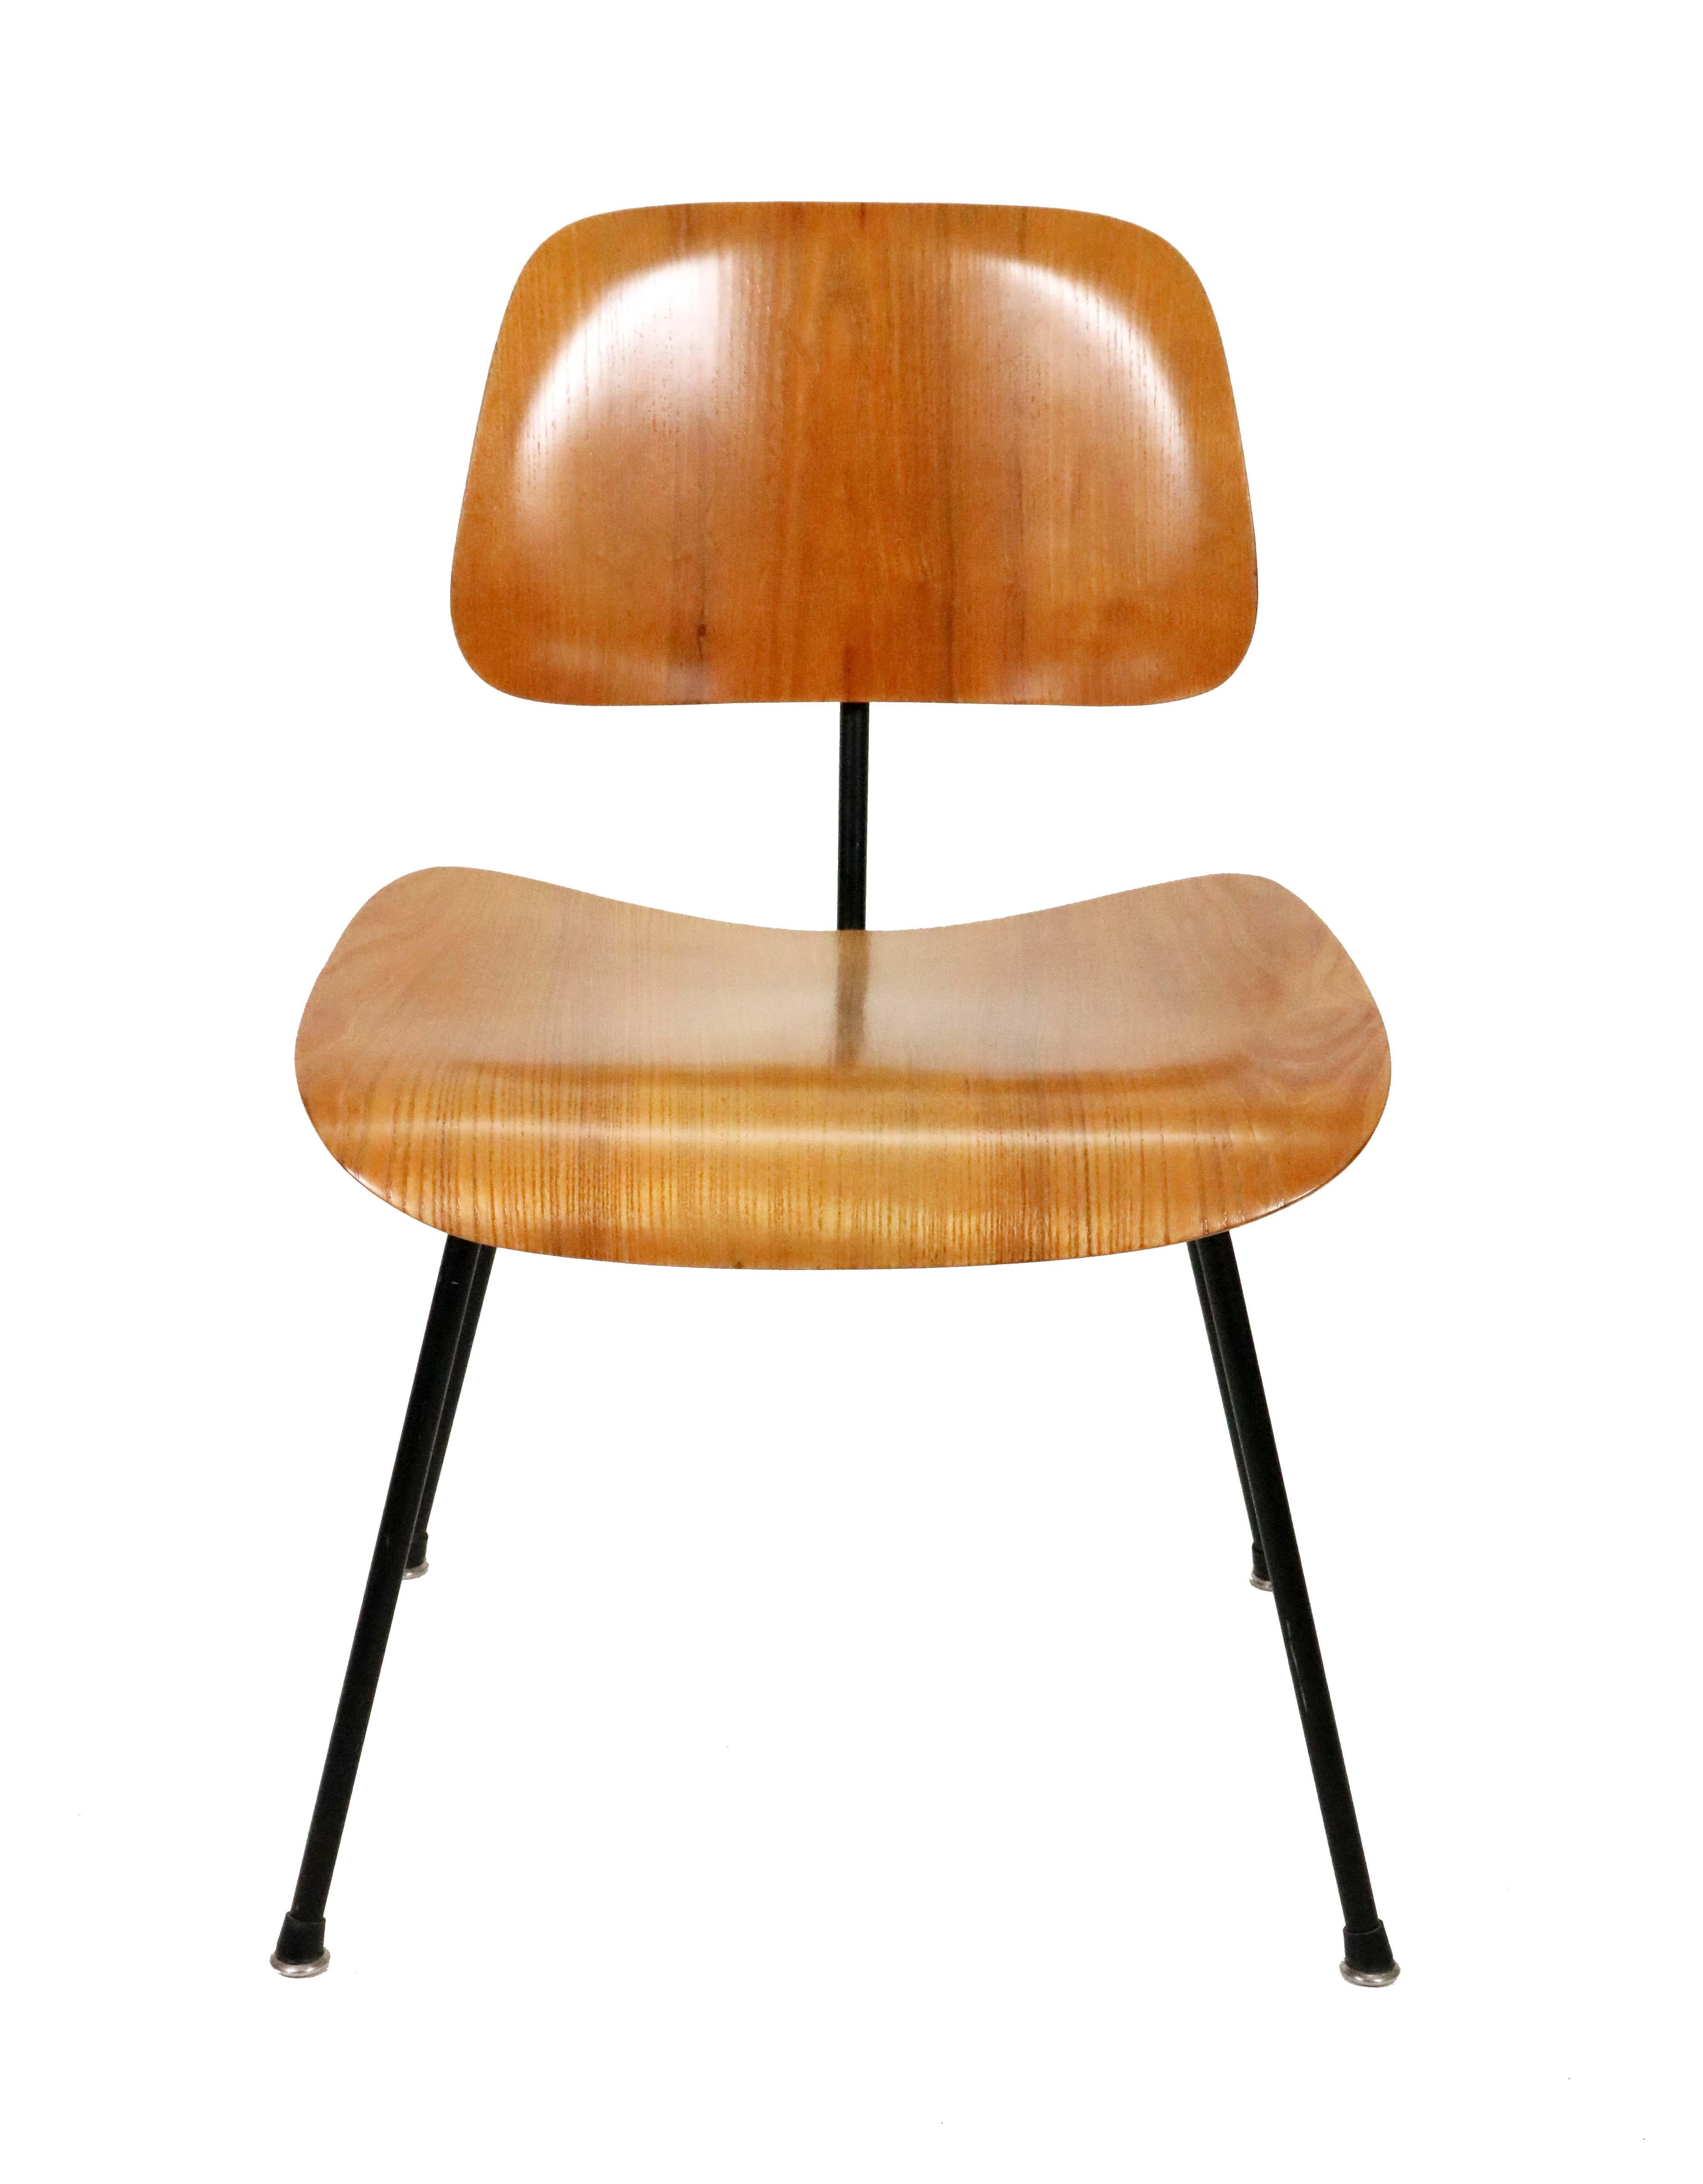 A recently refinished DCM chair by Charles and Ray Eames for Herman Miller with a steel black powder-coated base, walnut shells and new boot glides. 

Patent numbers document its manufacture to 1956-1959.